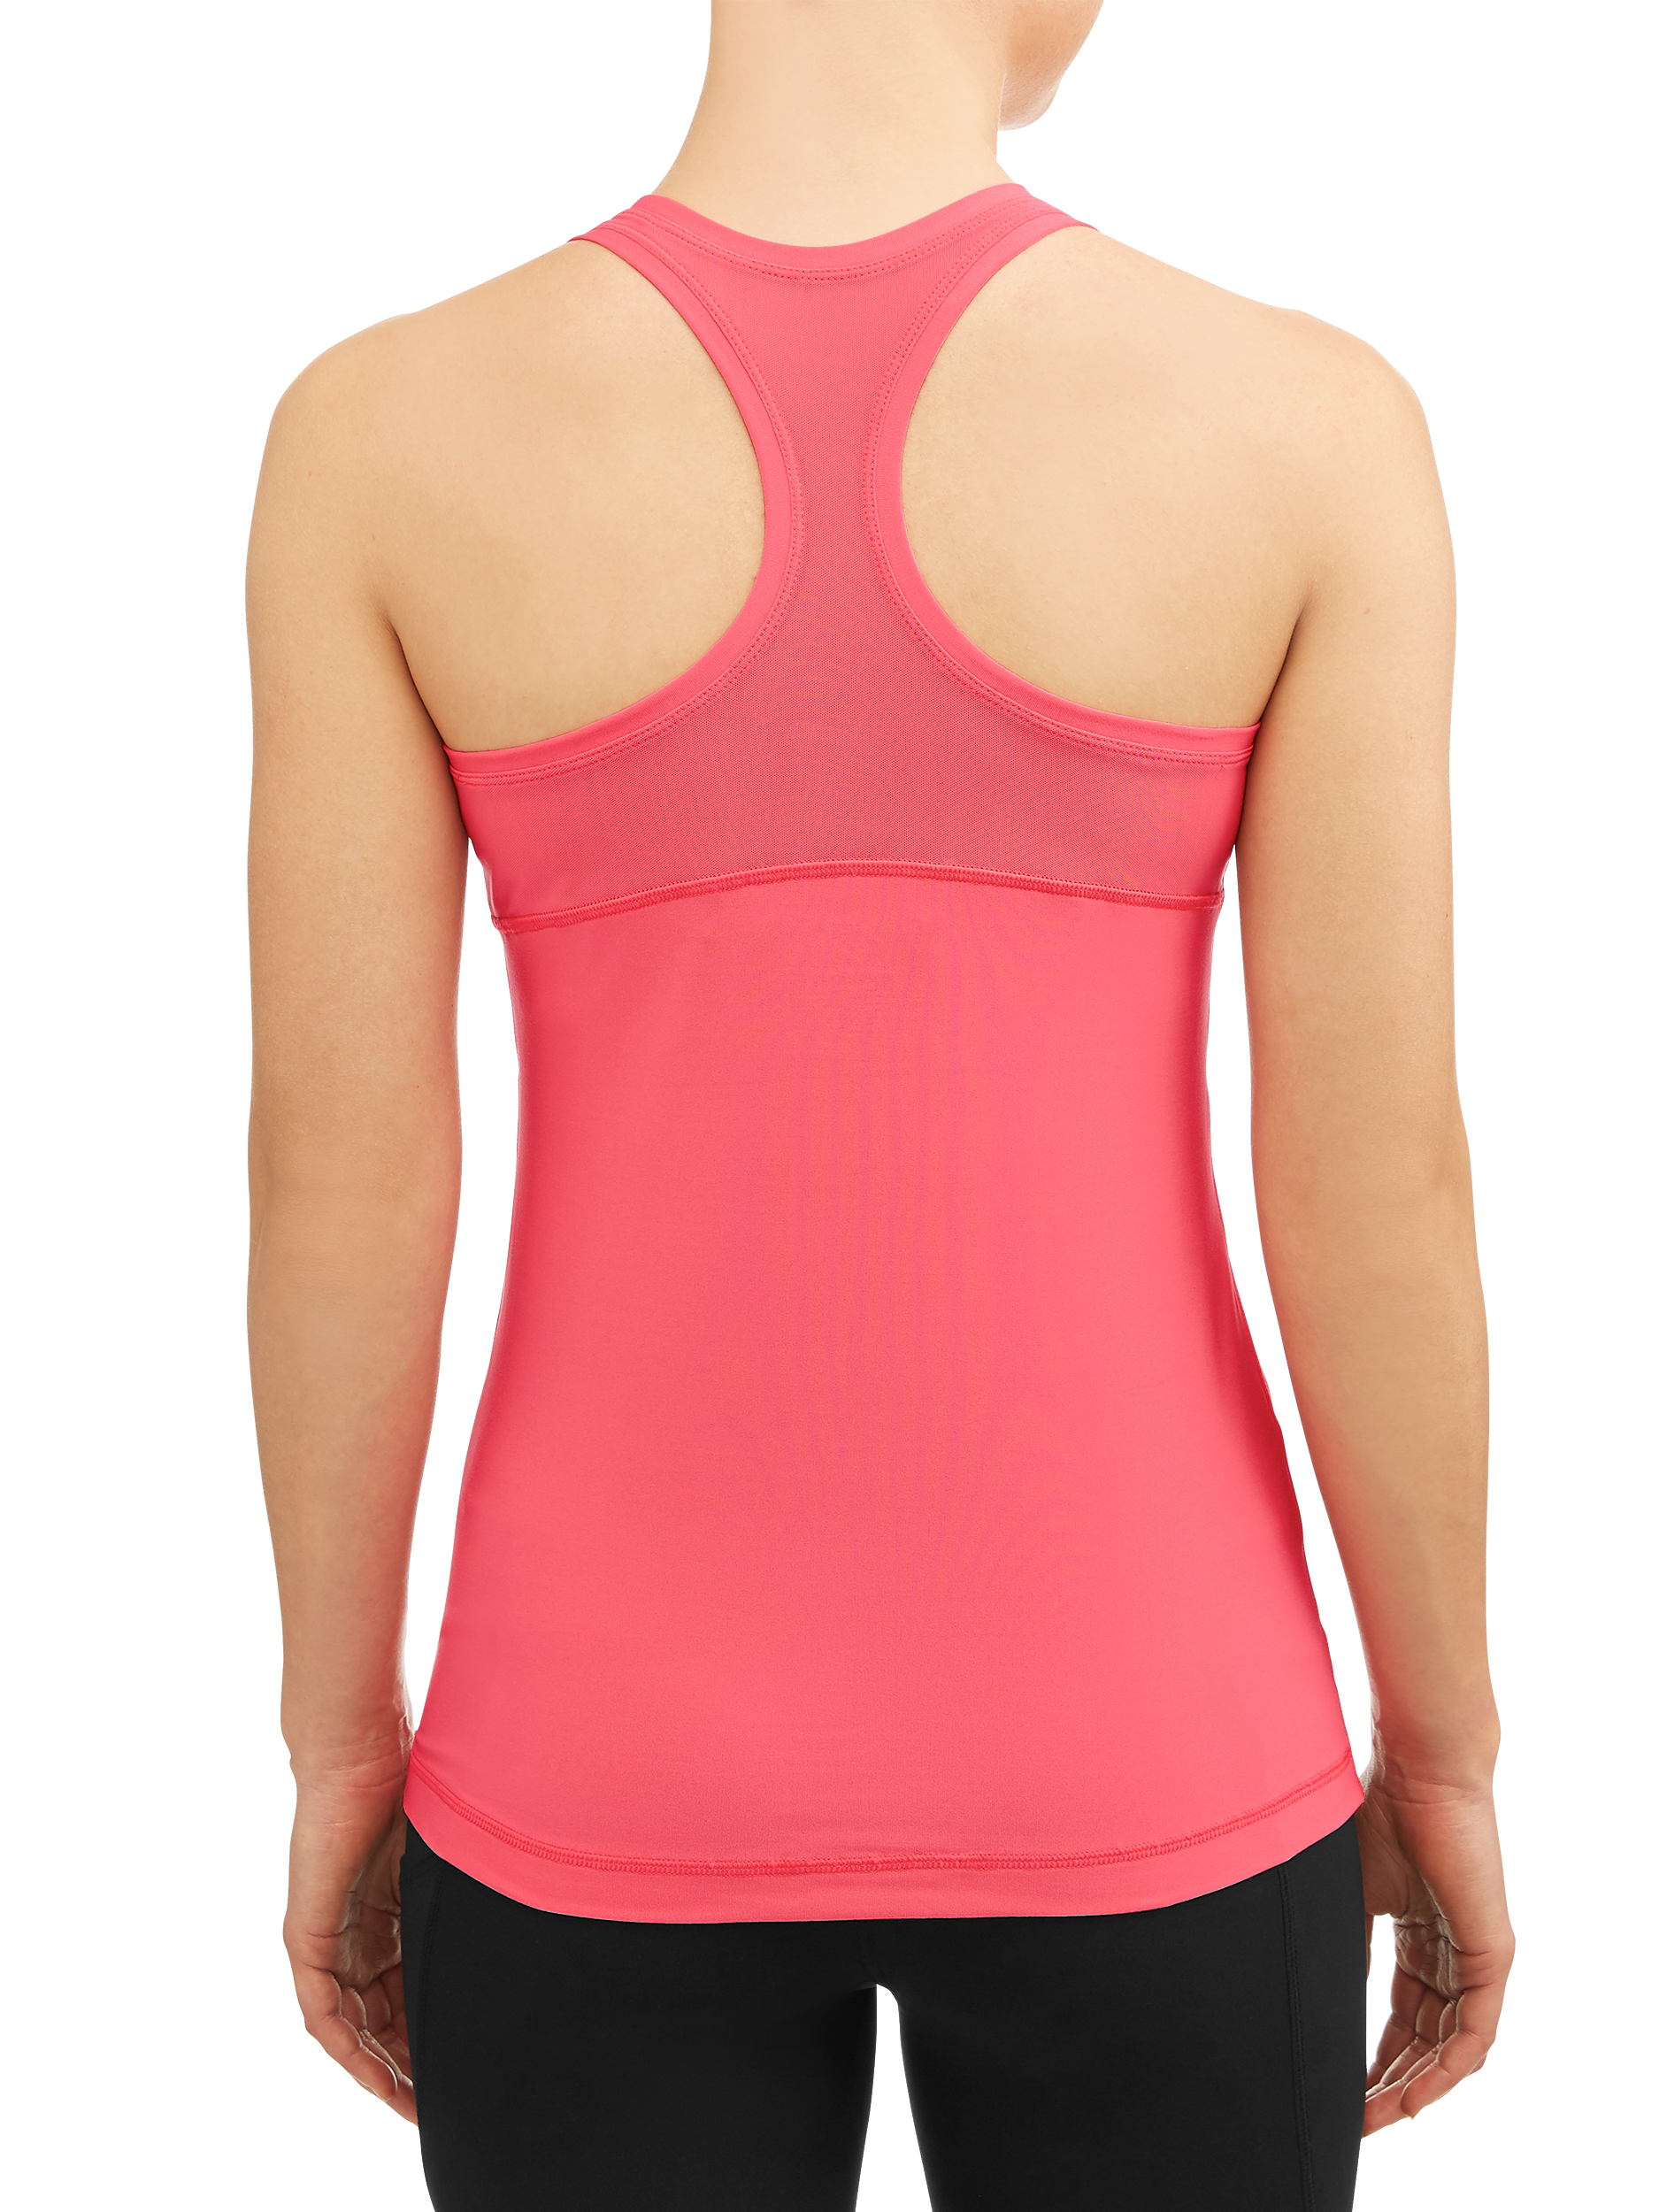 X by Gottex Women's Active Fitted Racer Back Tank Top - image 3 of 4